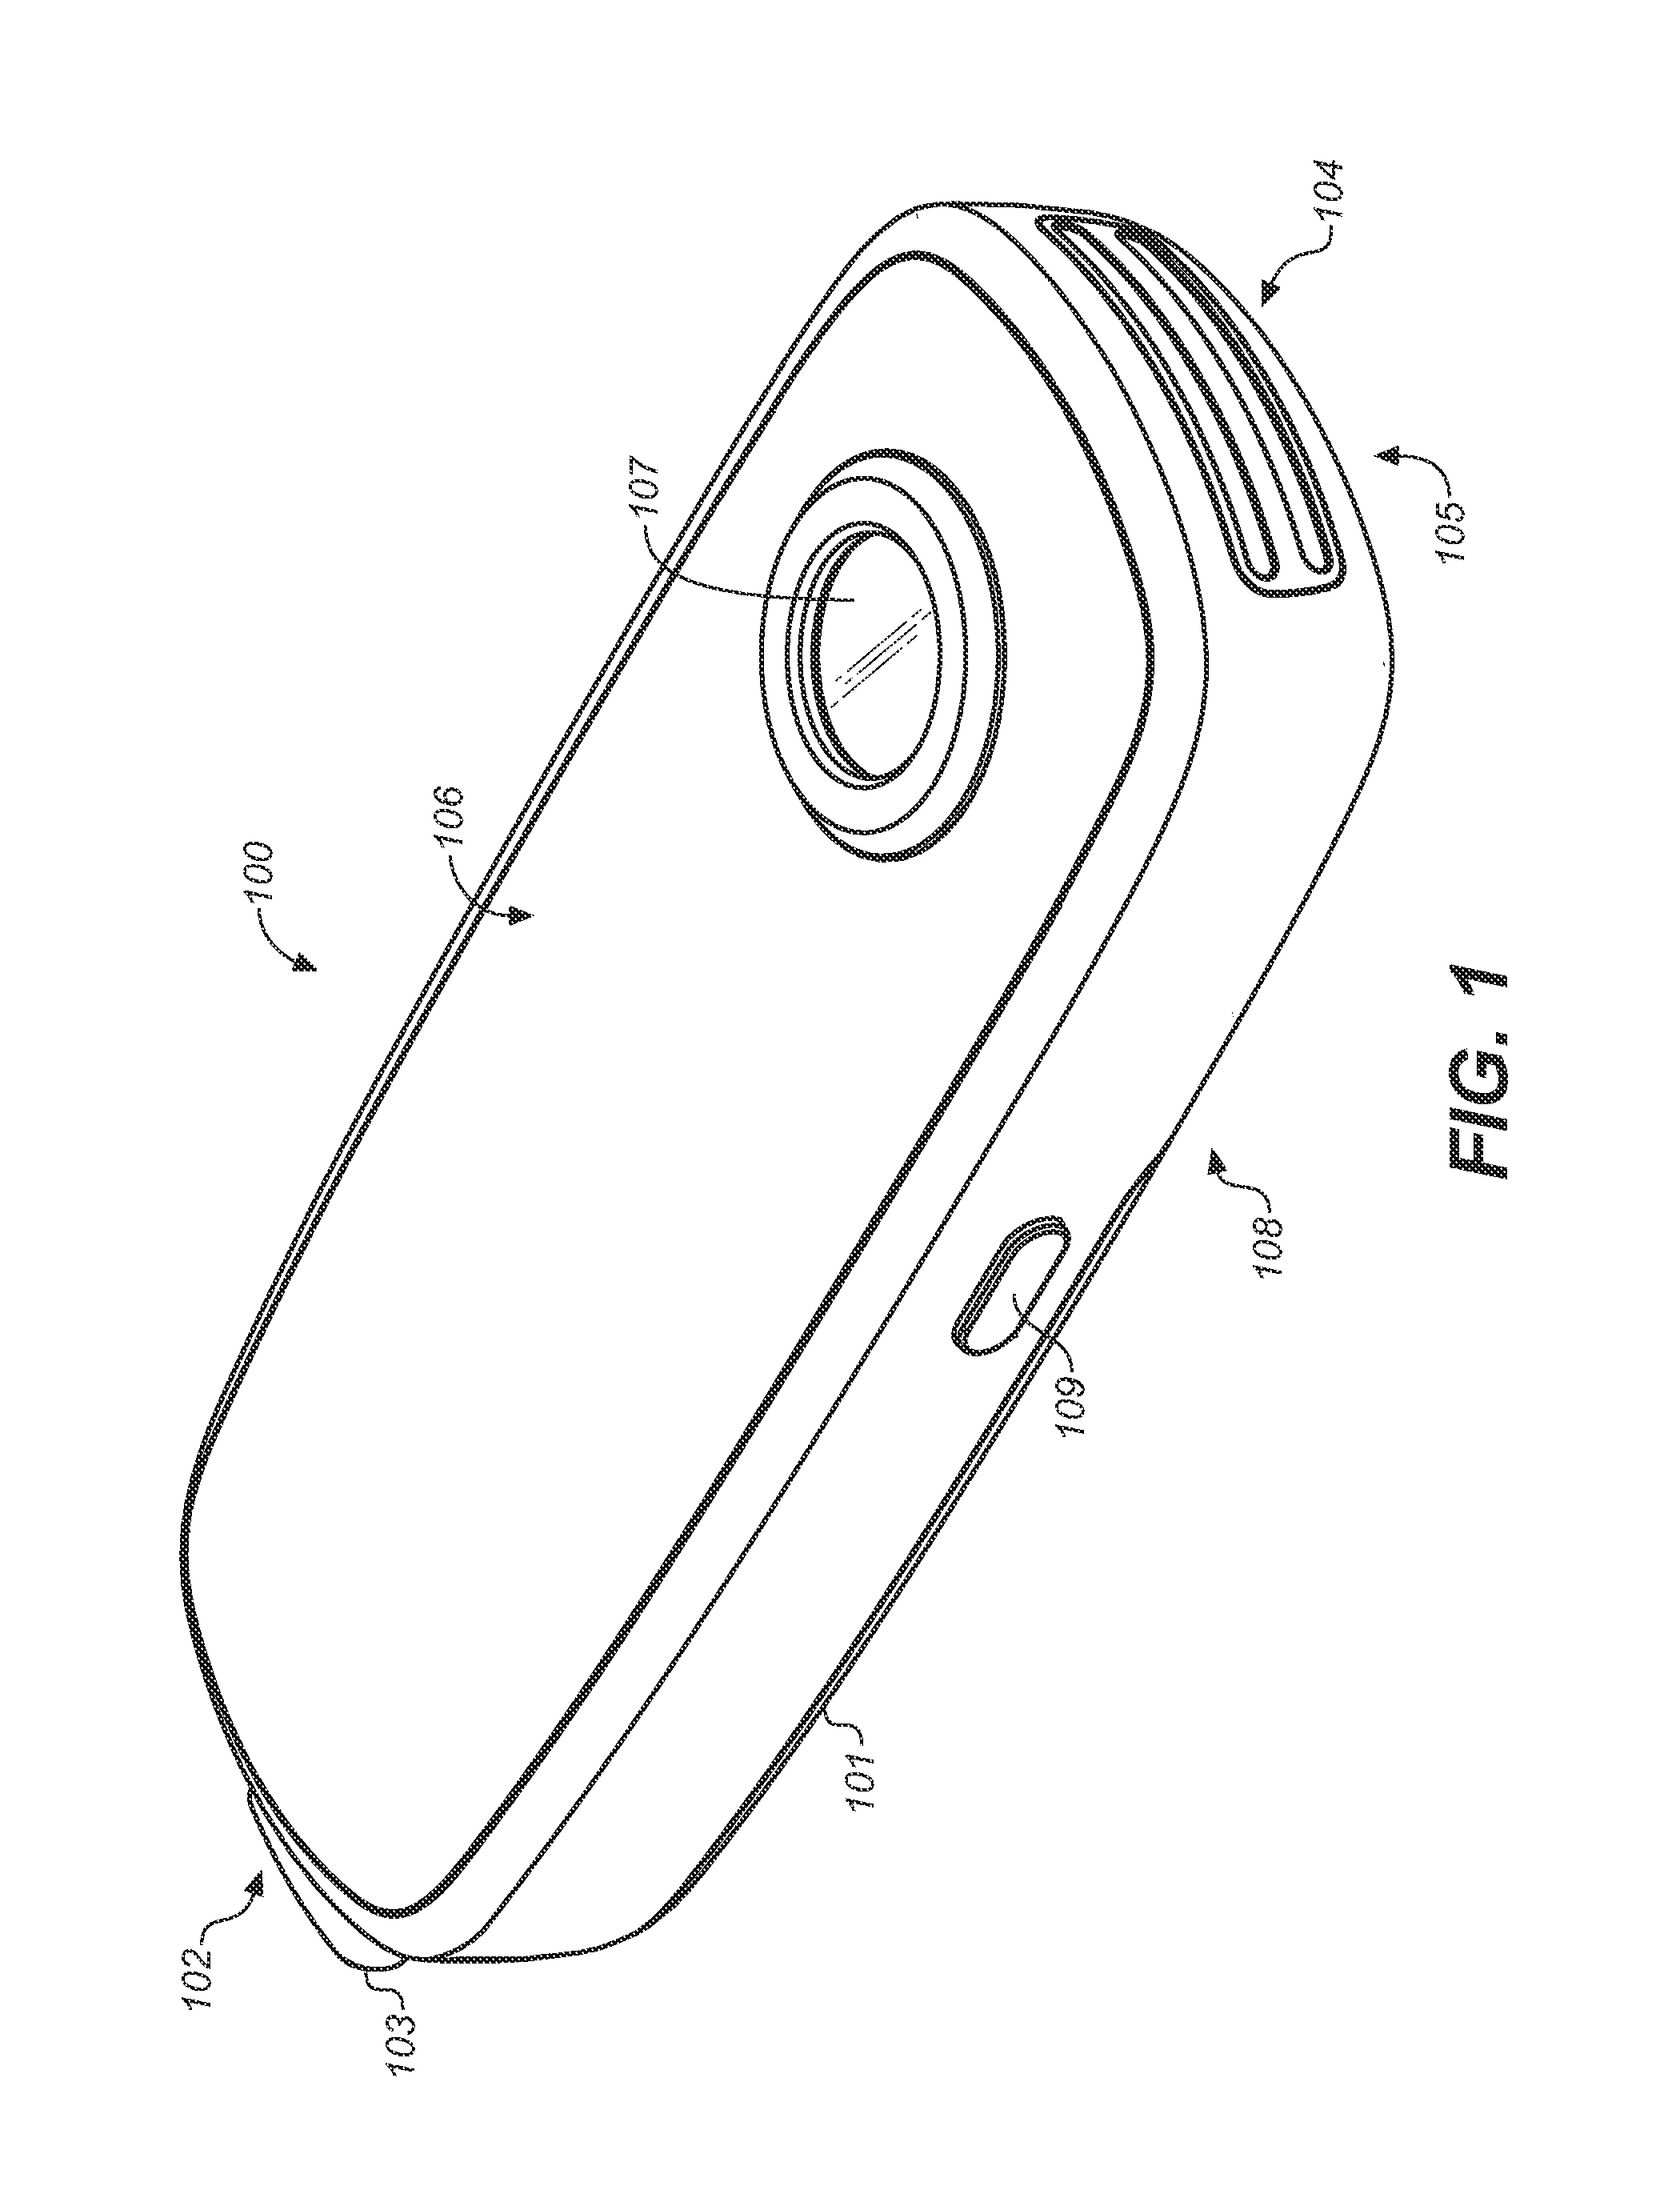 Portable vaporizer and method for temperature control